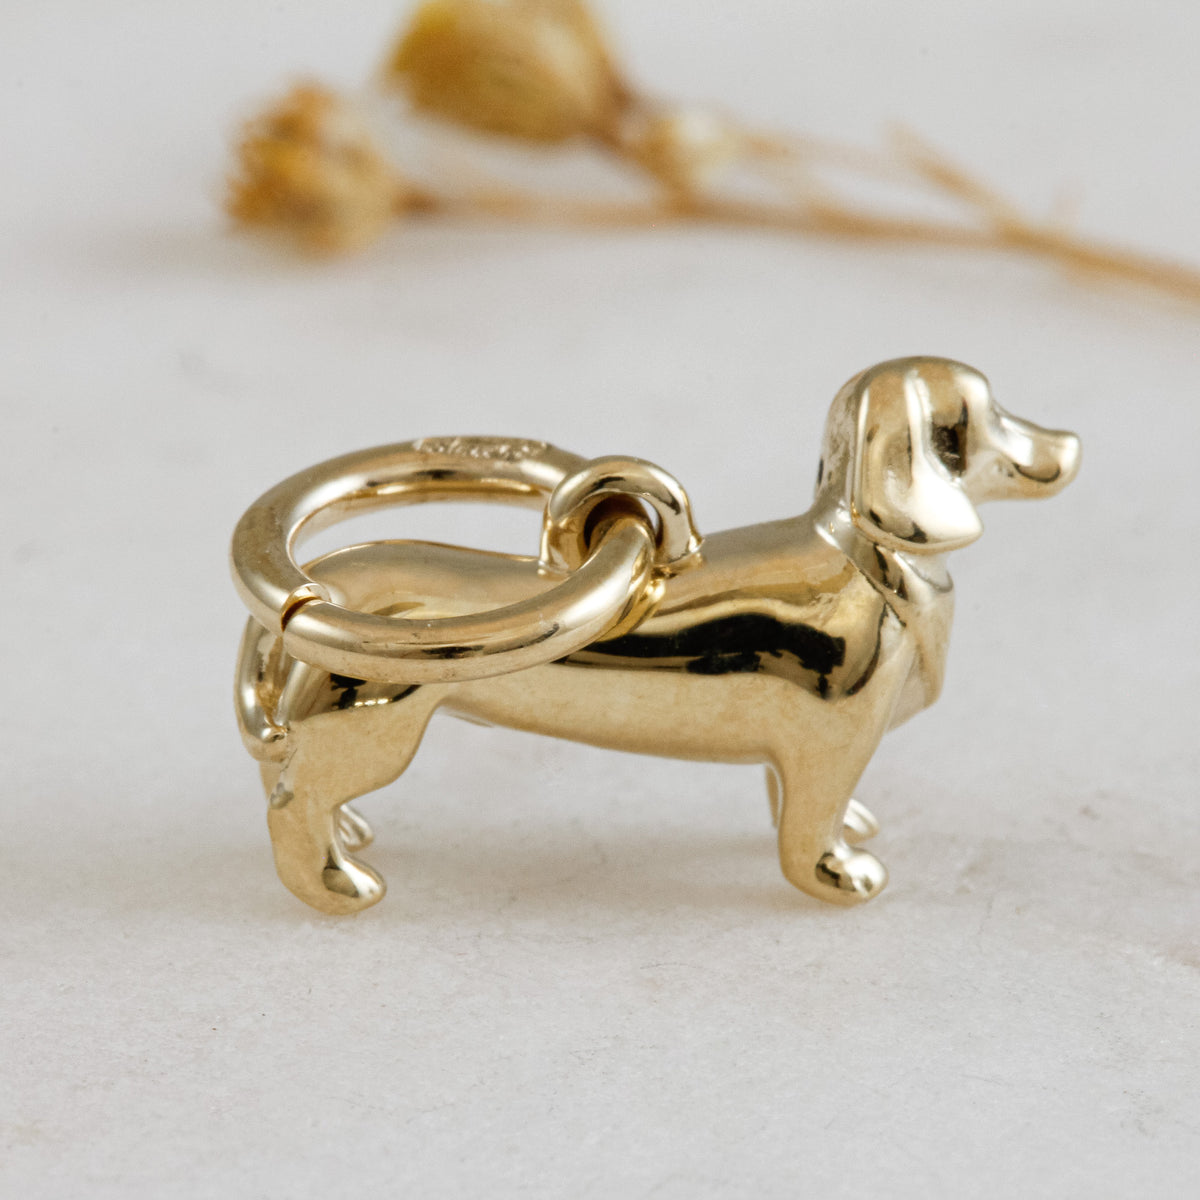 dachshund solid gold dog charm for a necklace or bracelet